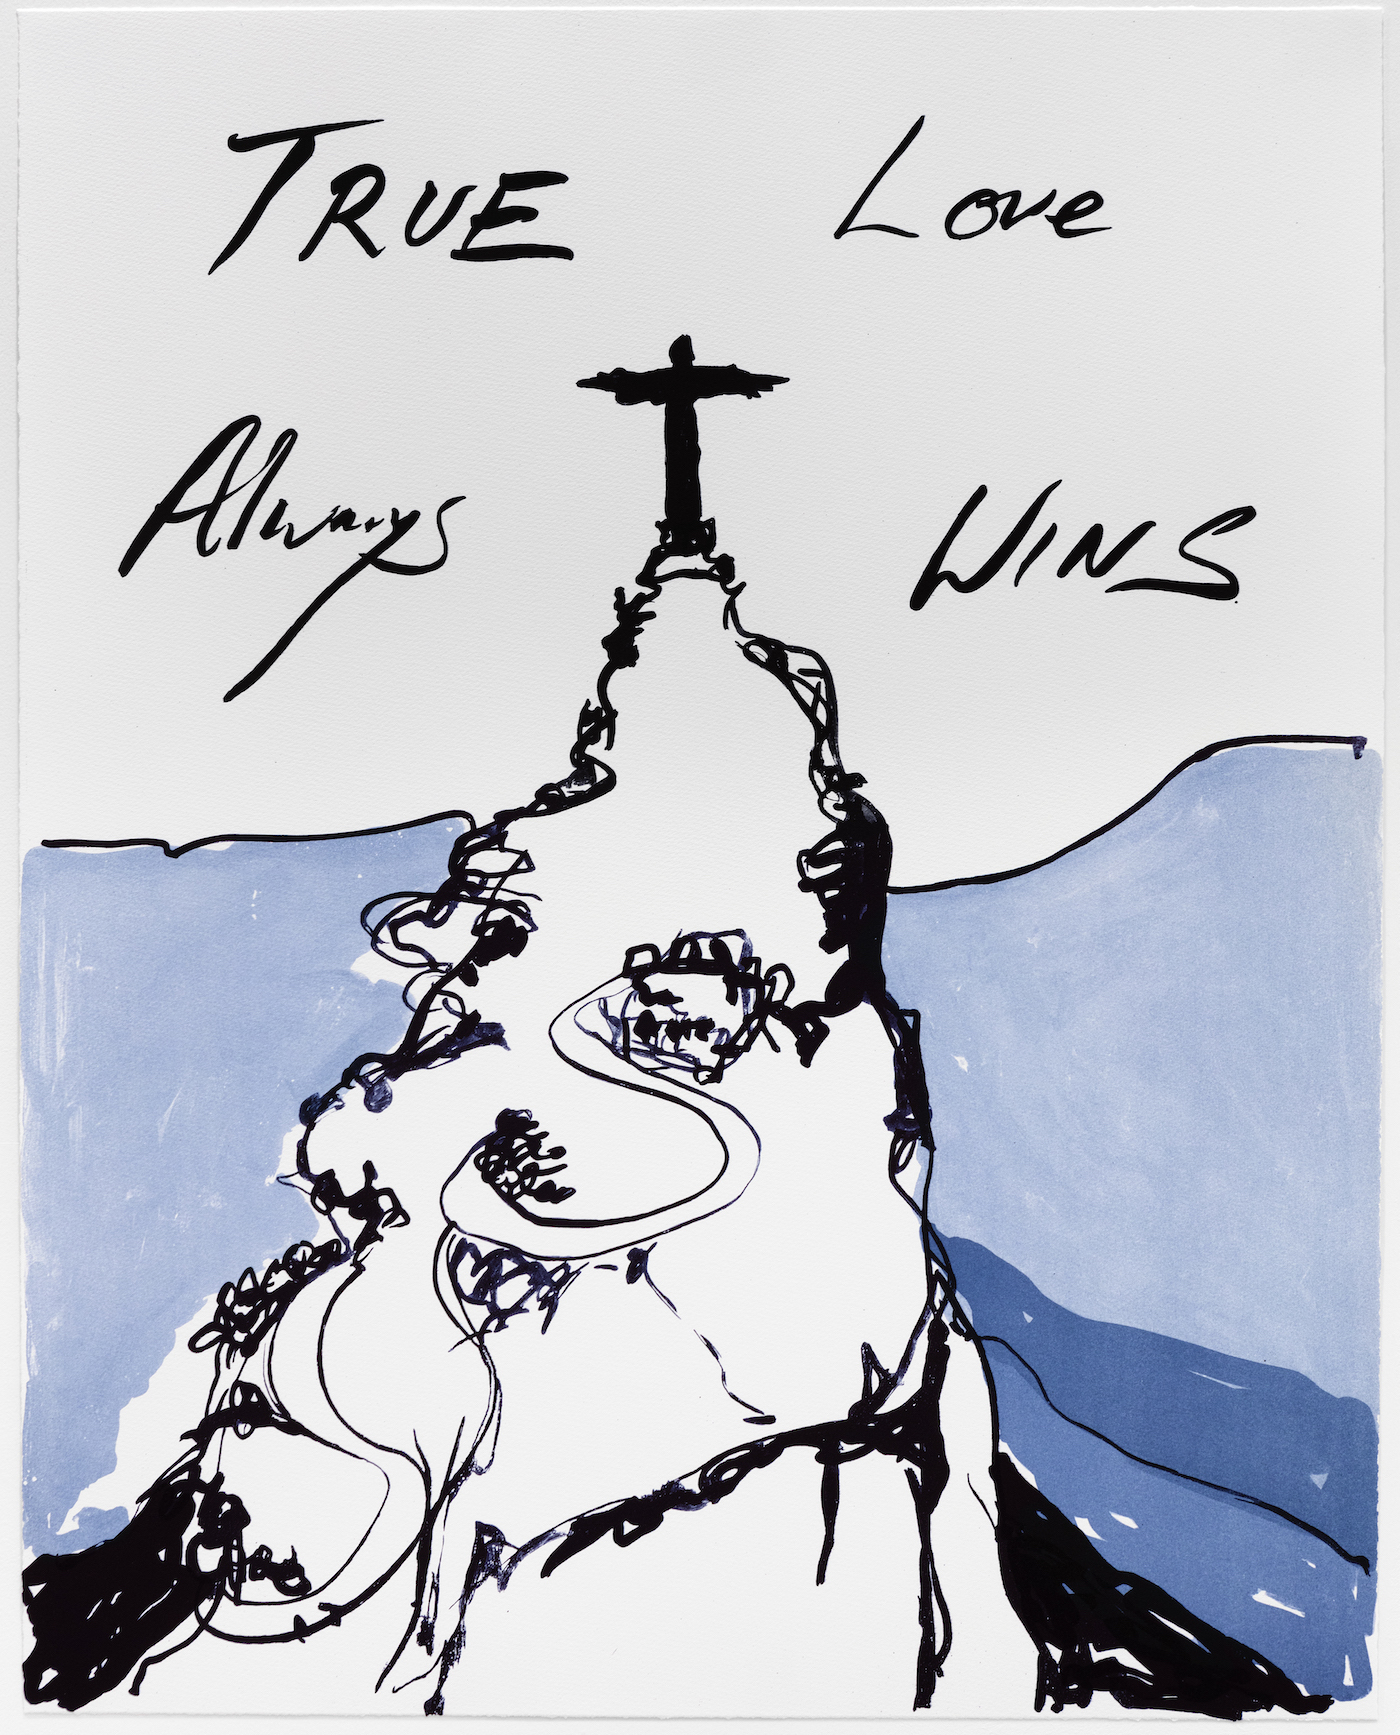 Tracey Emin, True Love Always Wins (2016) Four colour lithographic print on Somerset 300gsm Velvet White paper. Produced by Paupers Press, London Edition of 300 76 x 60cm Image credit: © Tracey Emin Courtesy of Counter Editions, London and Team GB